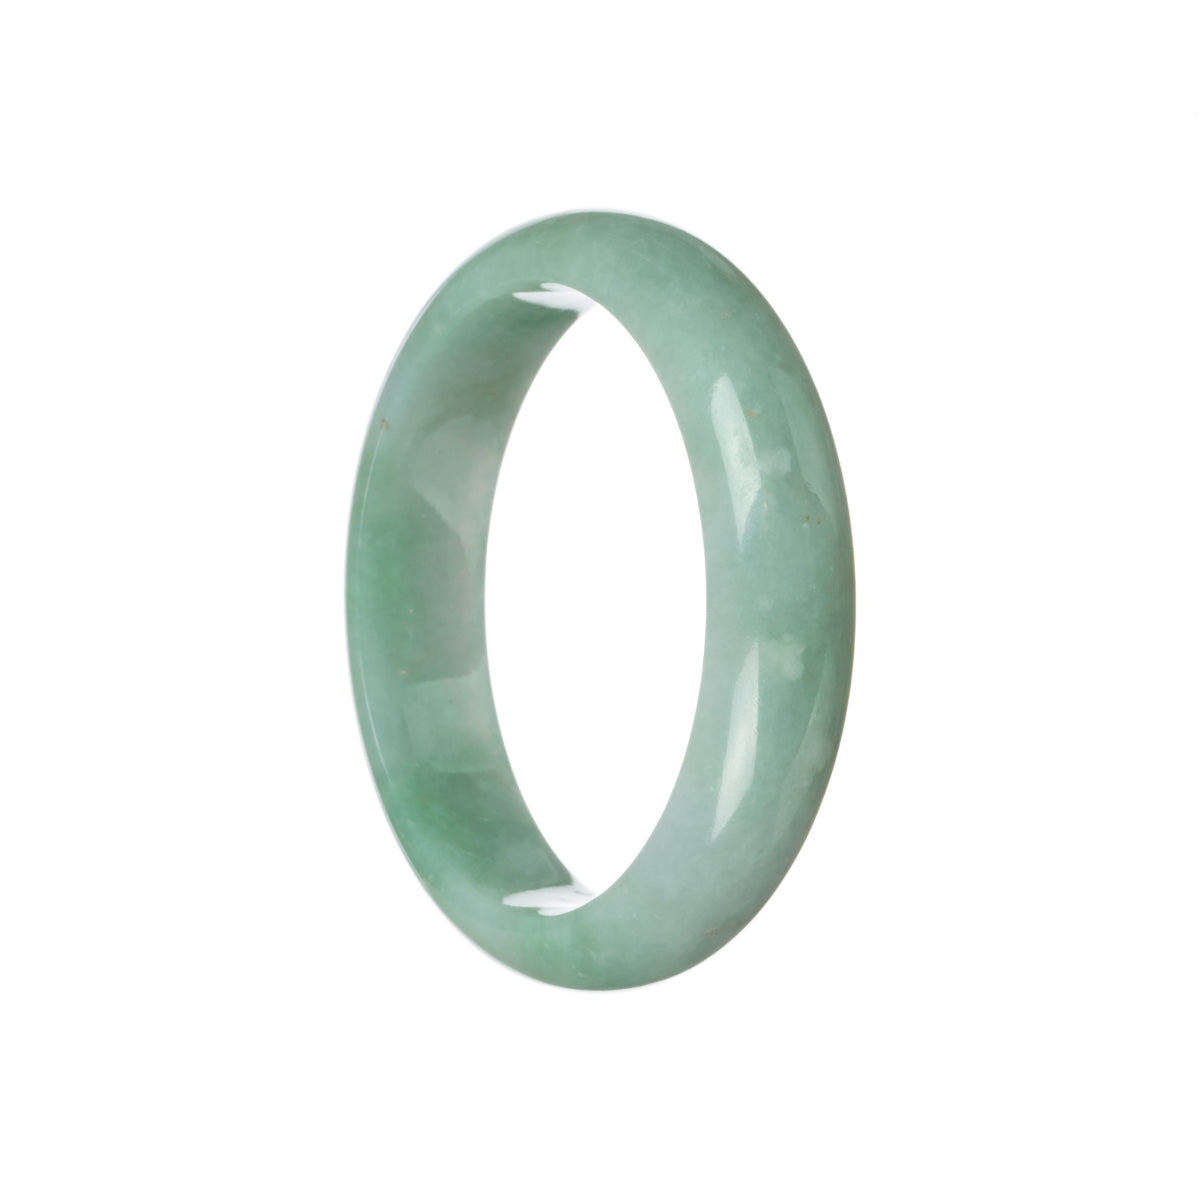 A close-up image of a green jadeite jade bracelet in the shape of a half moon, measuring 58mm in diameter. The bracelet features a smooth and polished surface, showcasing the natural beauty of the jade stone. The color of the jade is a vibrant green, with subtle variations and patterns running through it. The bracelet is designed to be worn on the wrist, adding an elegant and earthy touch to any outfit.